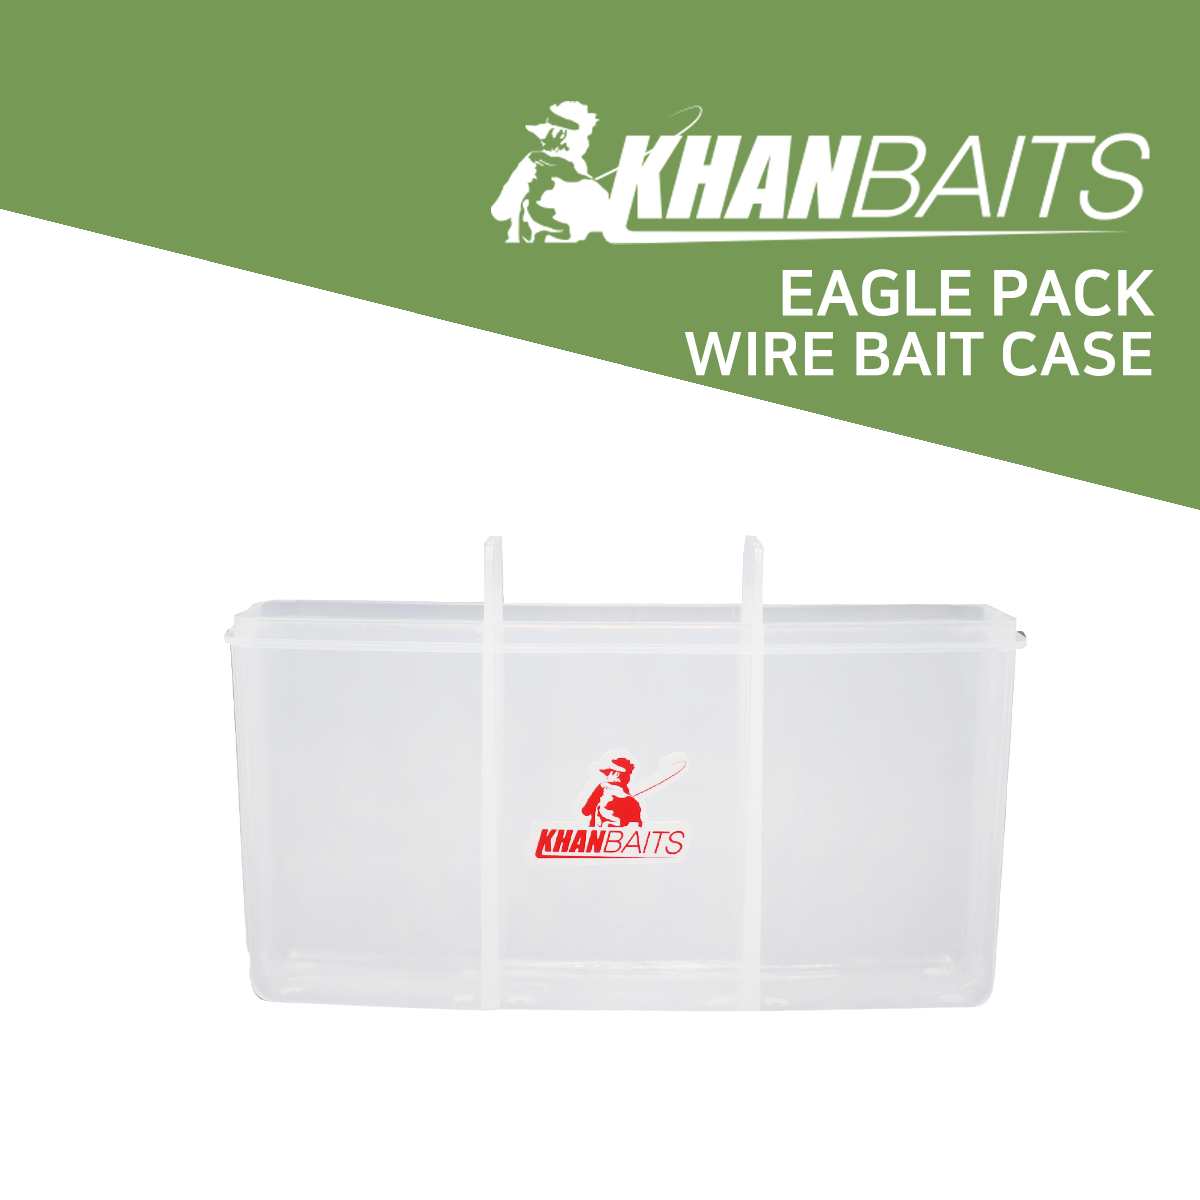 EAGLE PACK - WIRE BAIT CASE